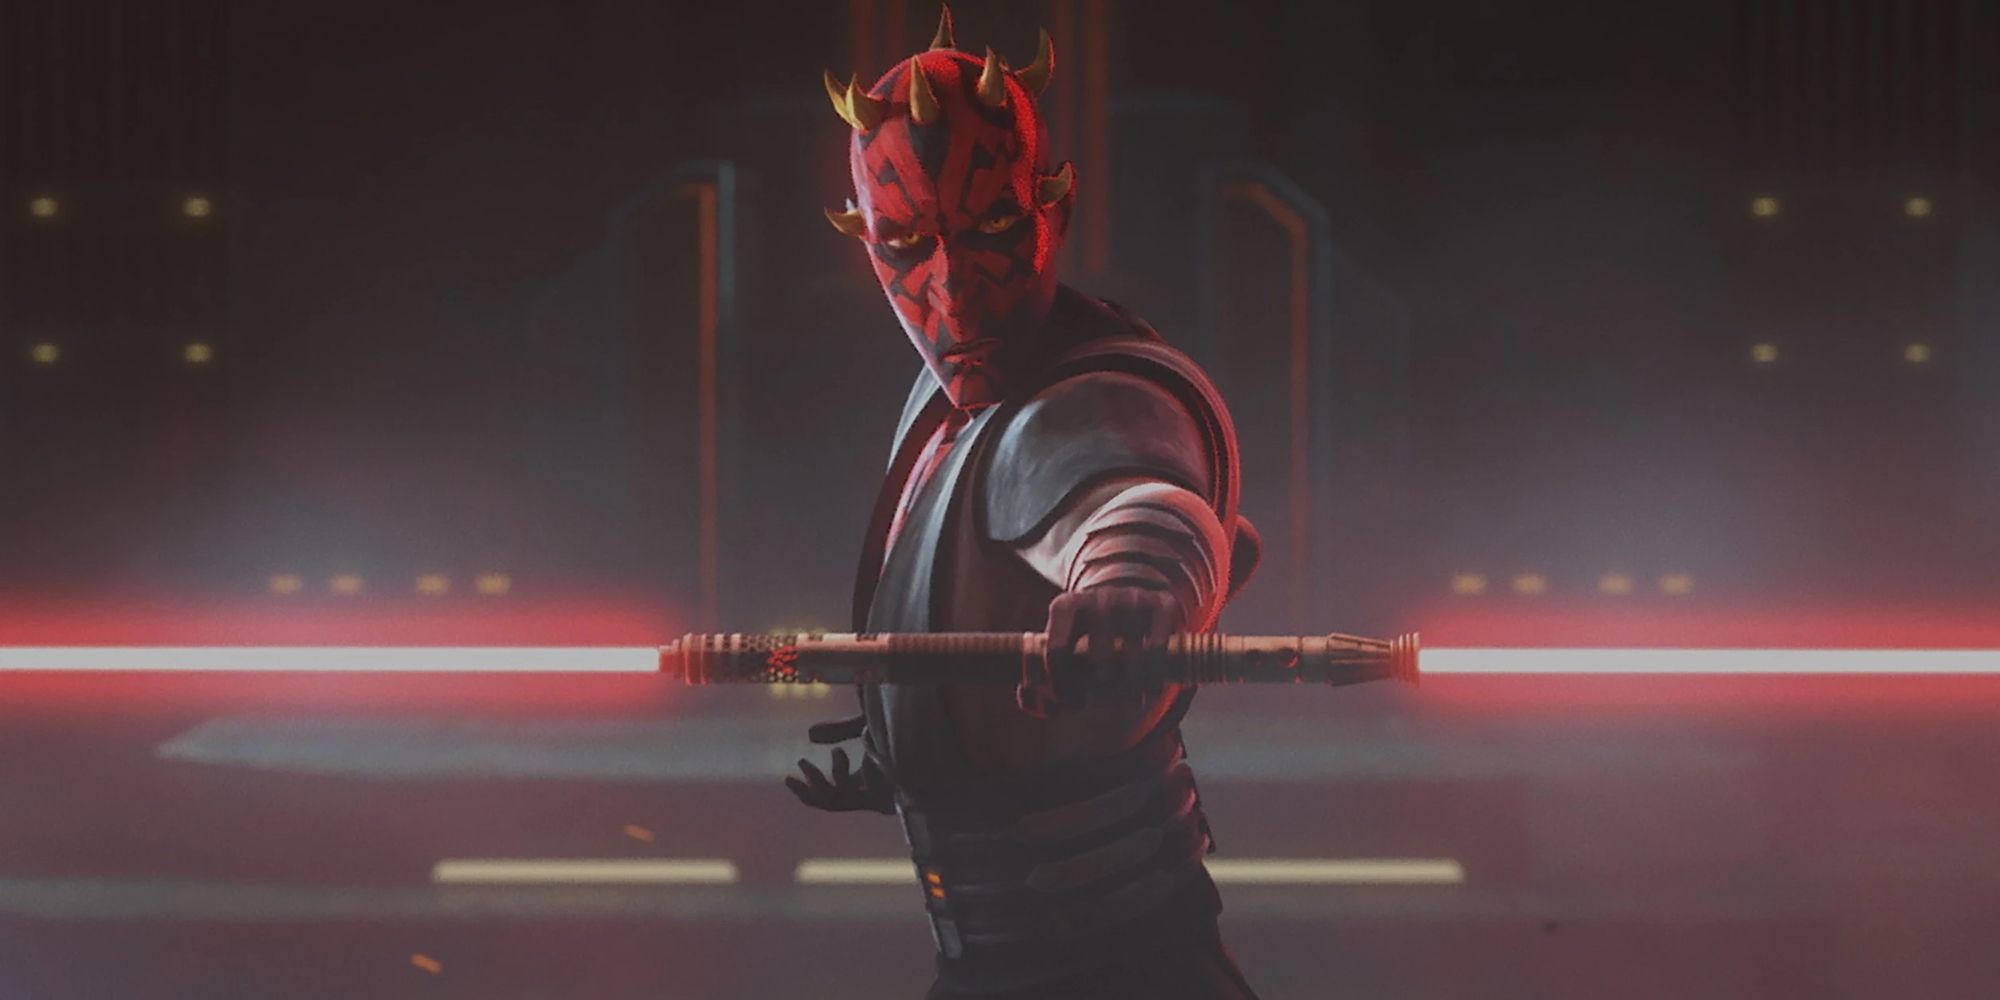 Darth Maul holding his lightsaber in Star Wars: The Clone Wars